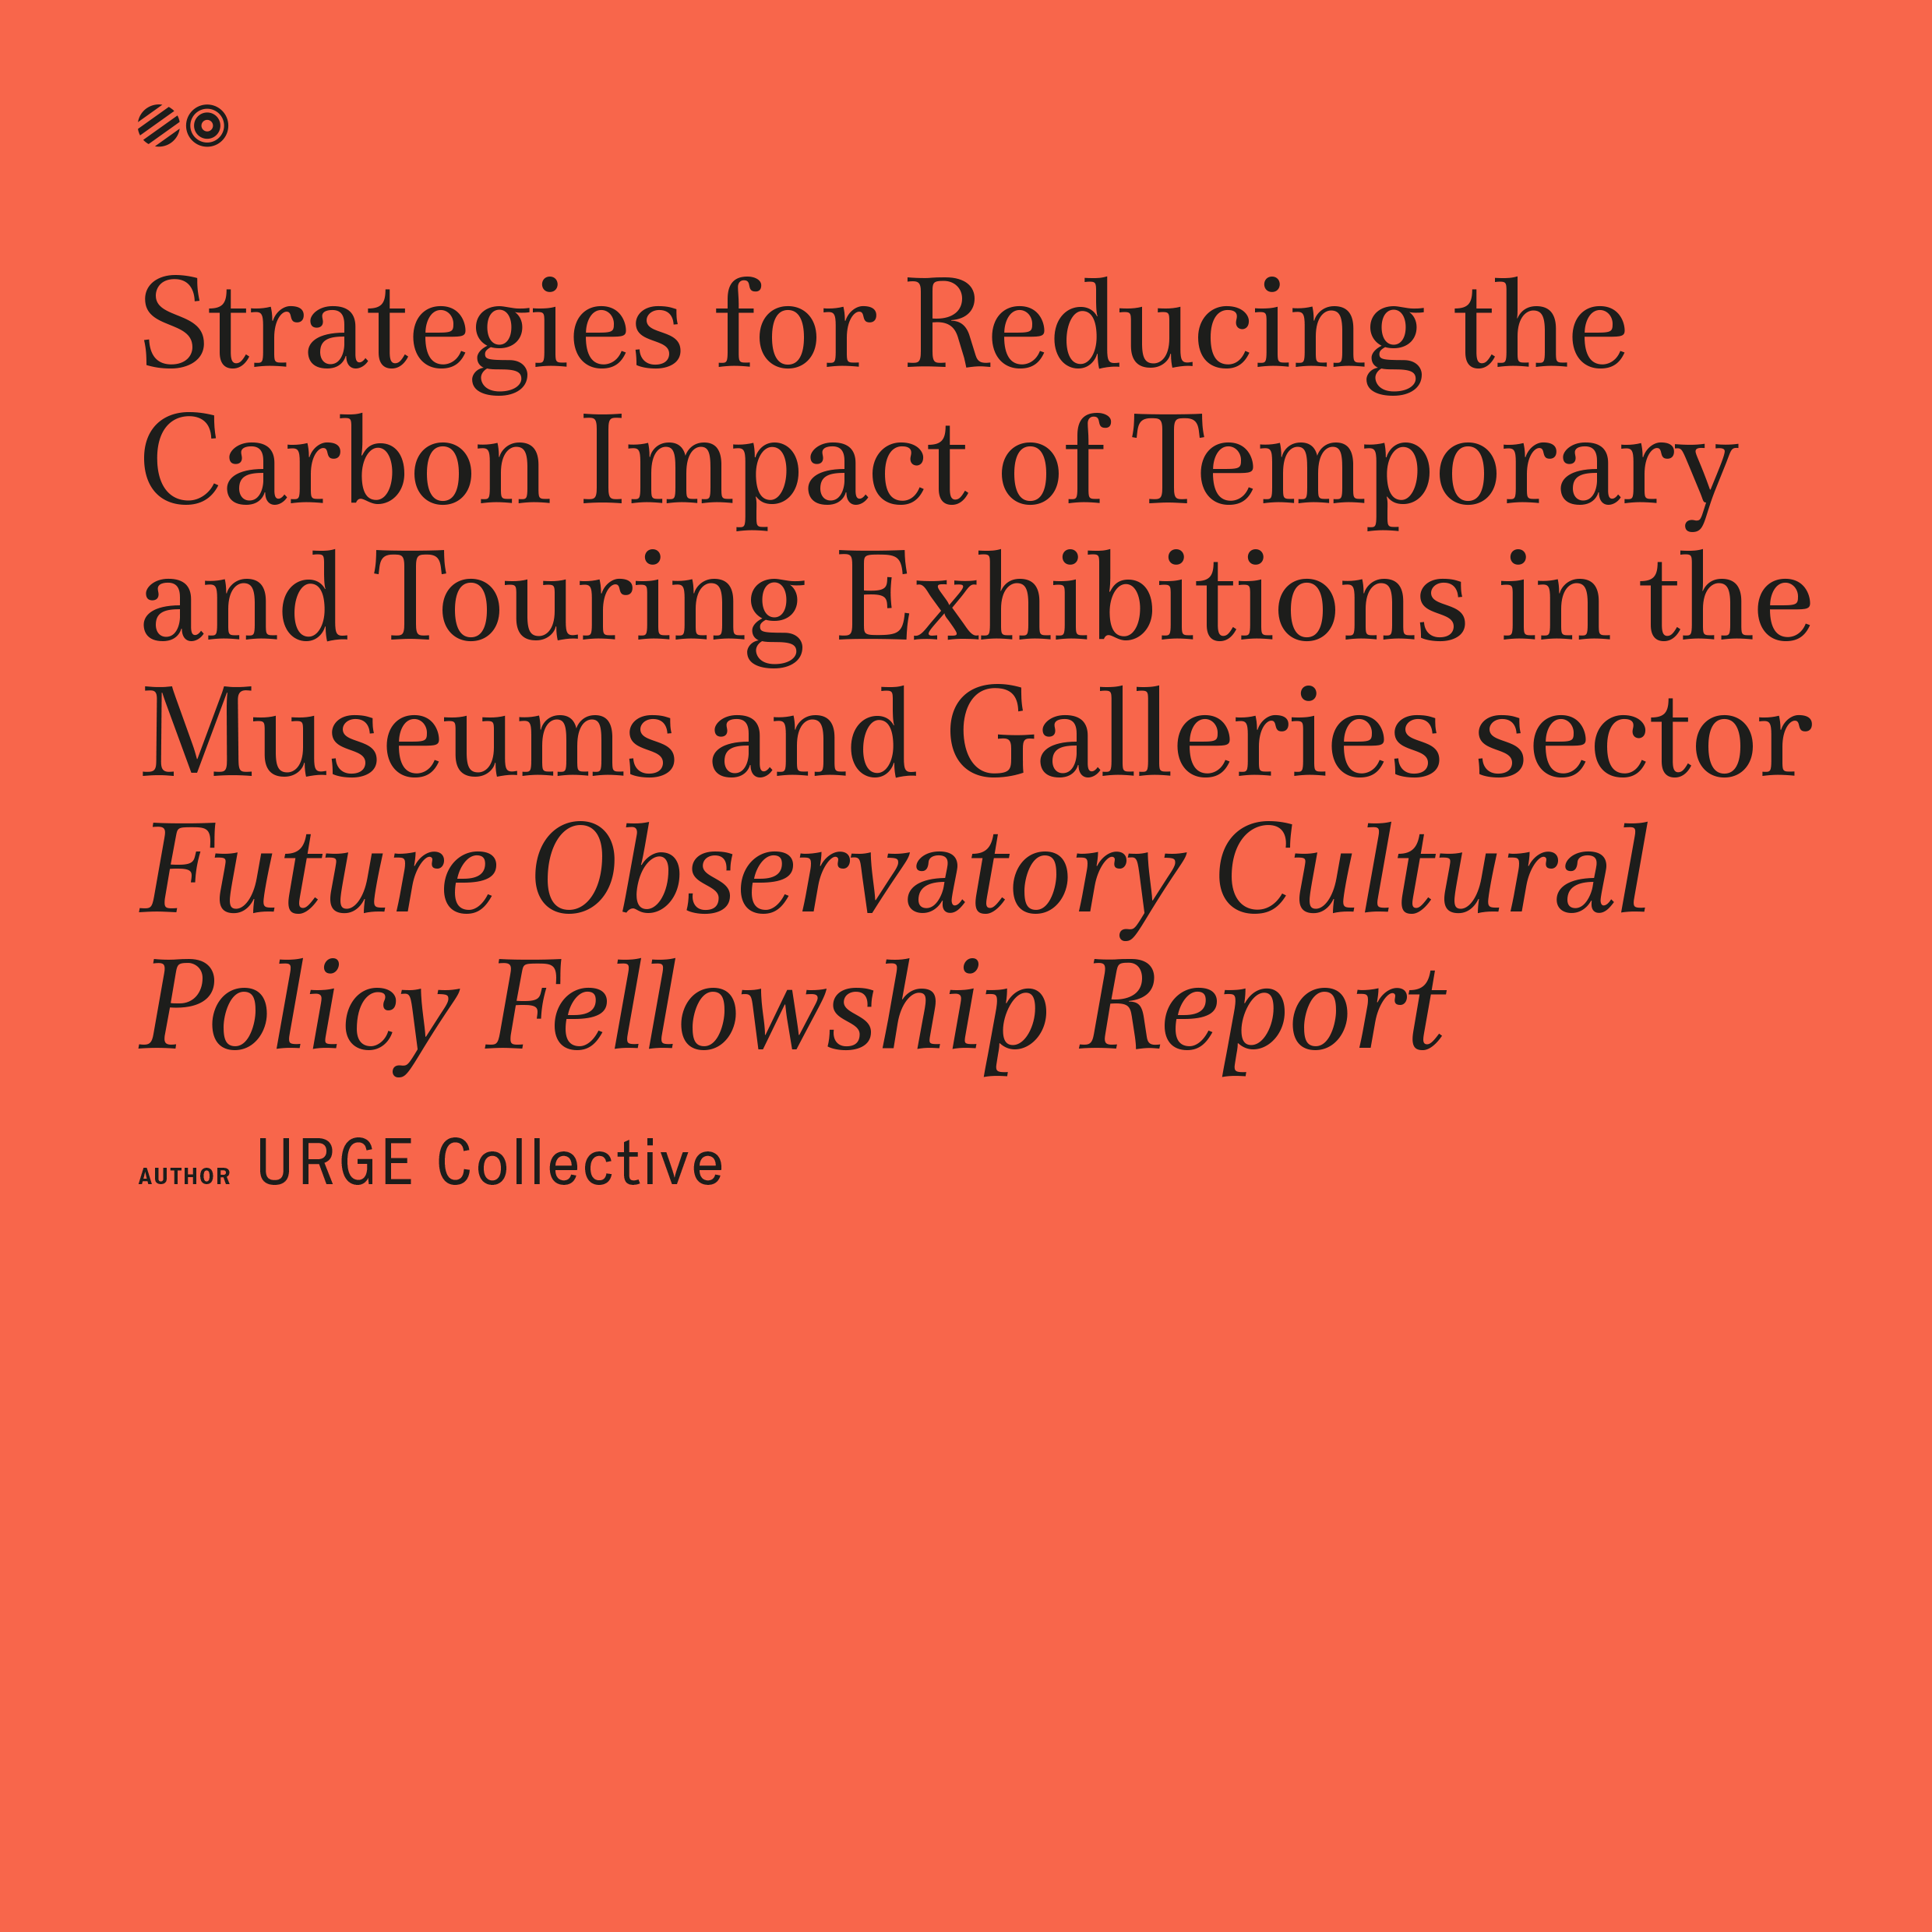 fo-cultural-policy-report_urge-1.png